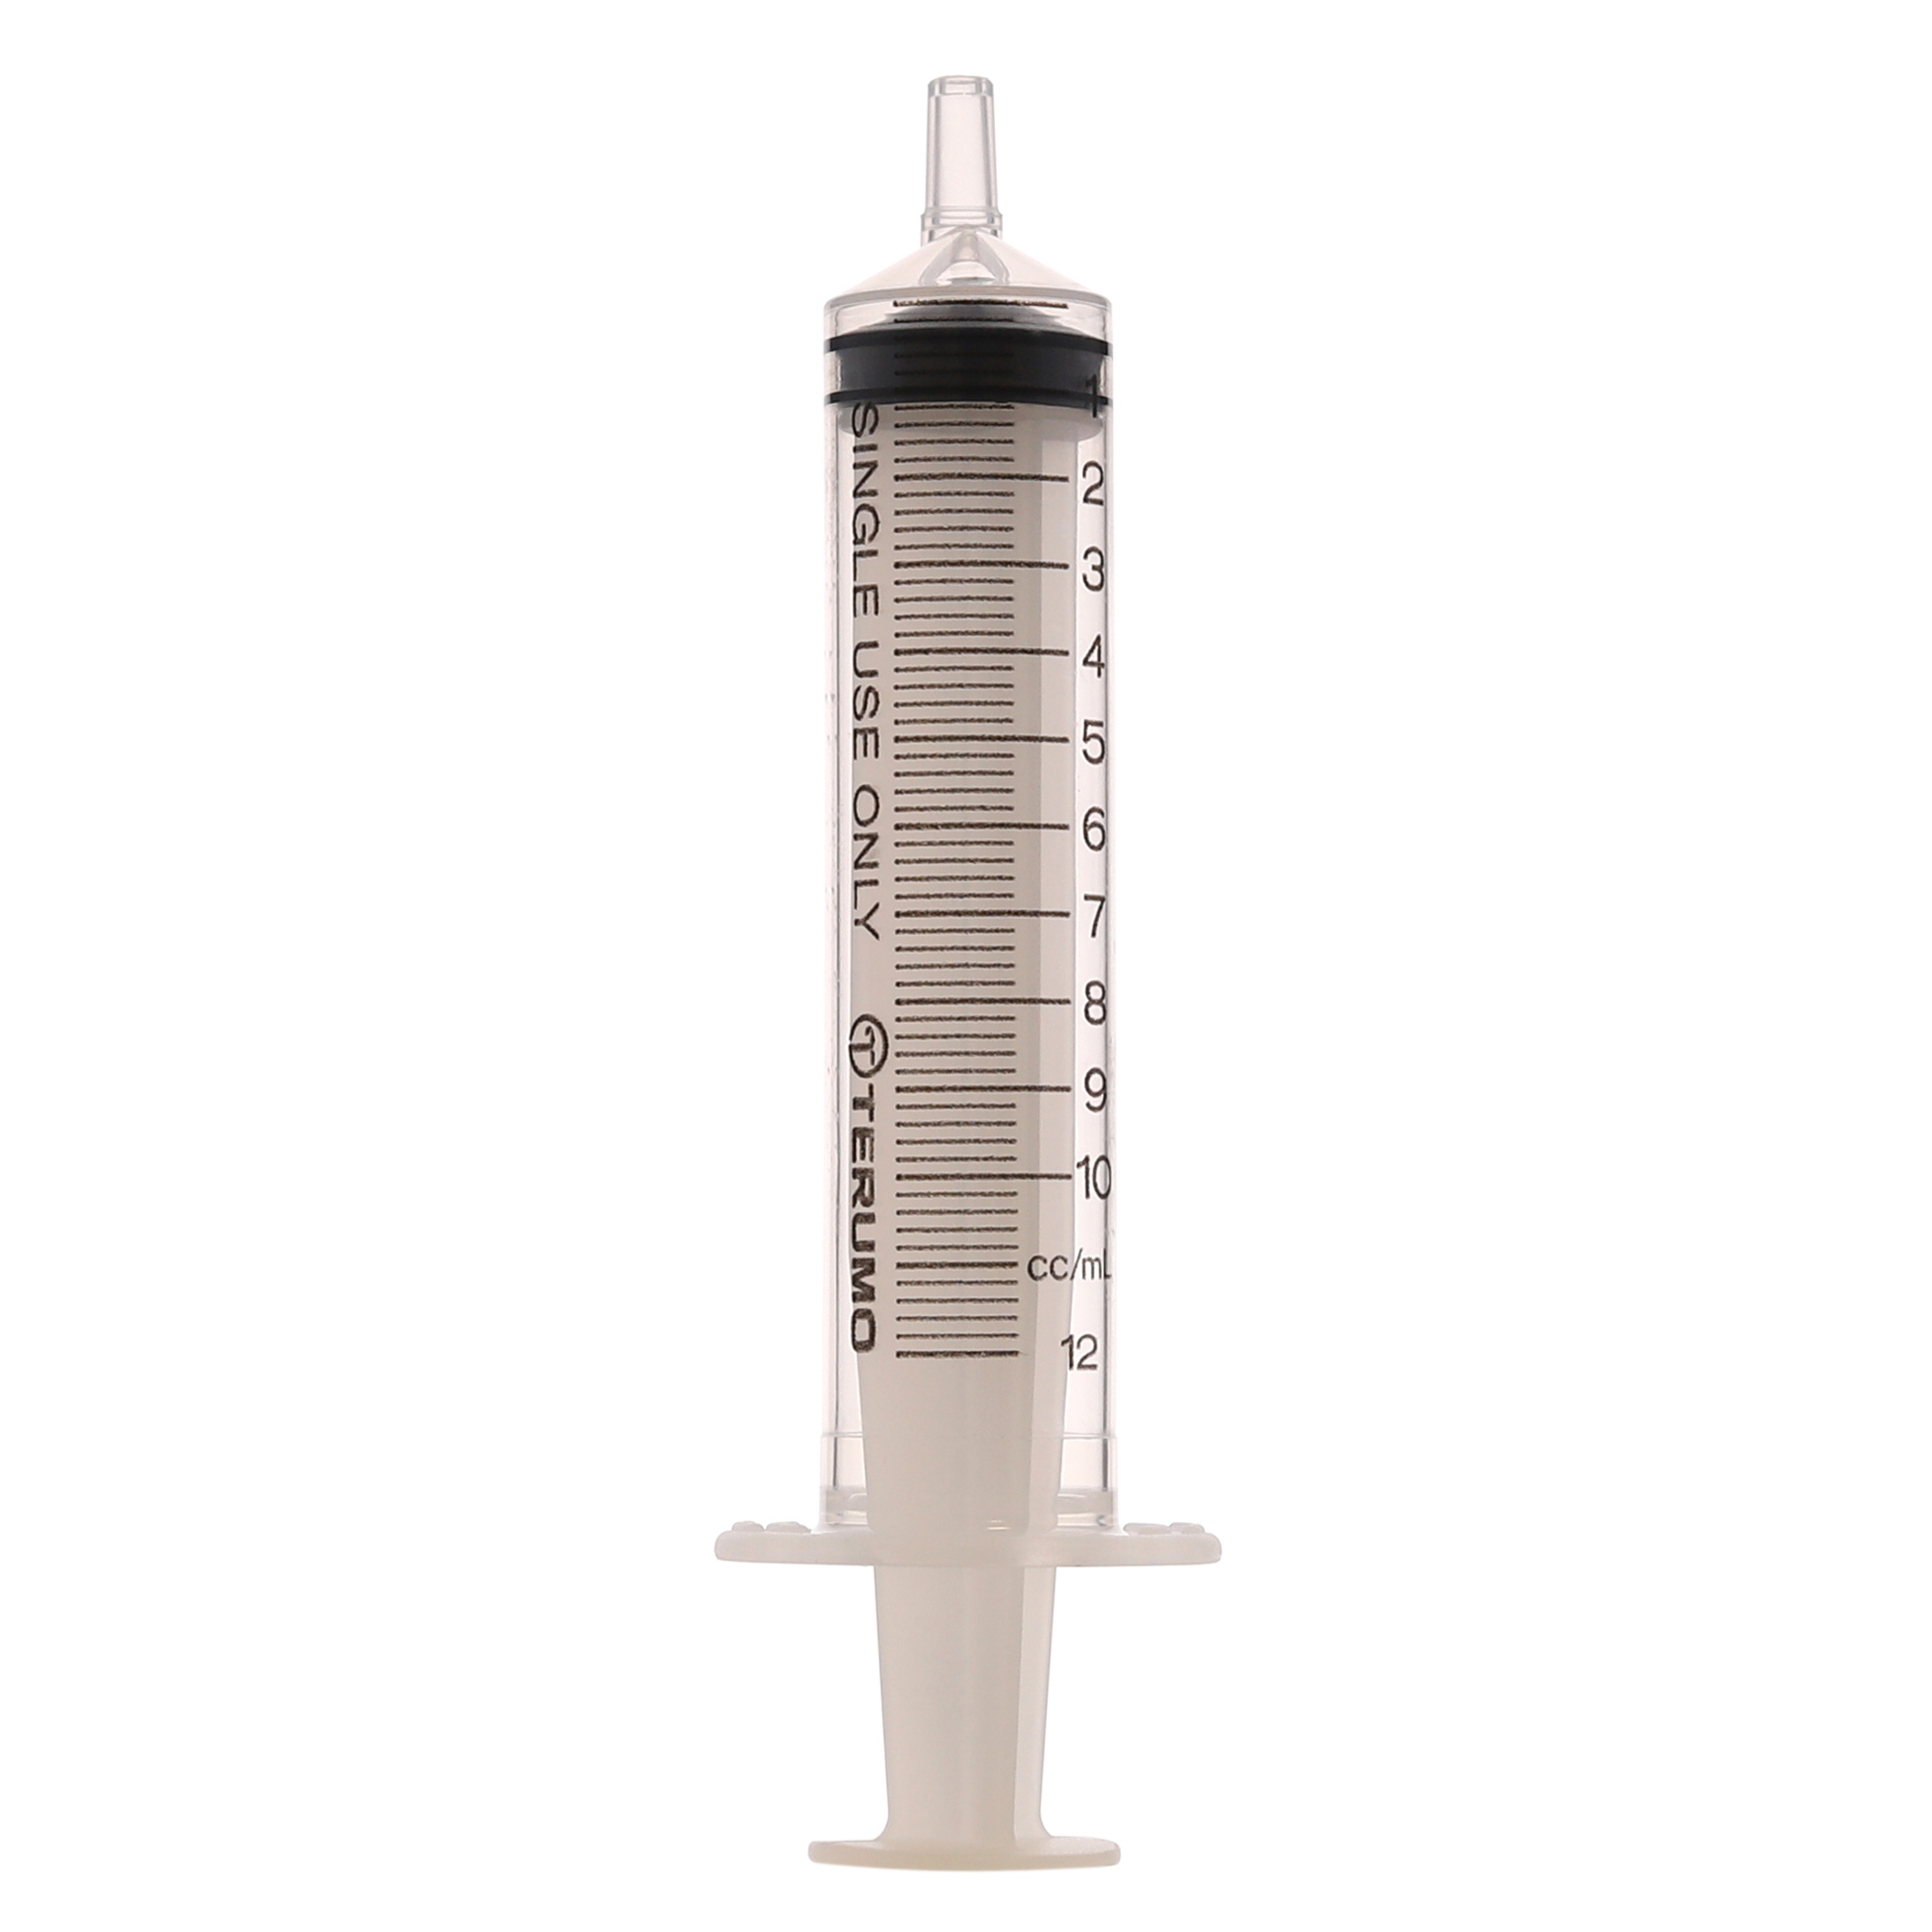 Syringes Disposable Steril Luer Fit 10ml